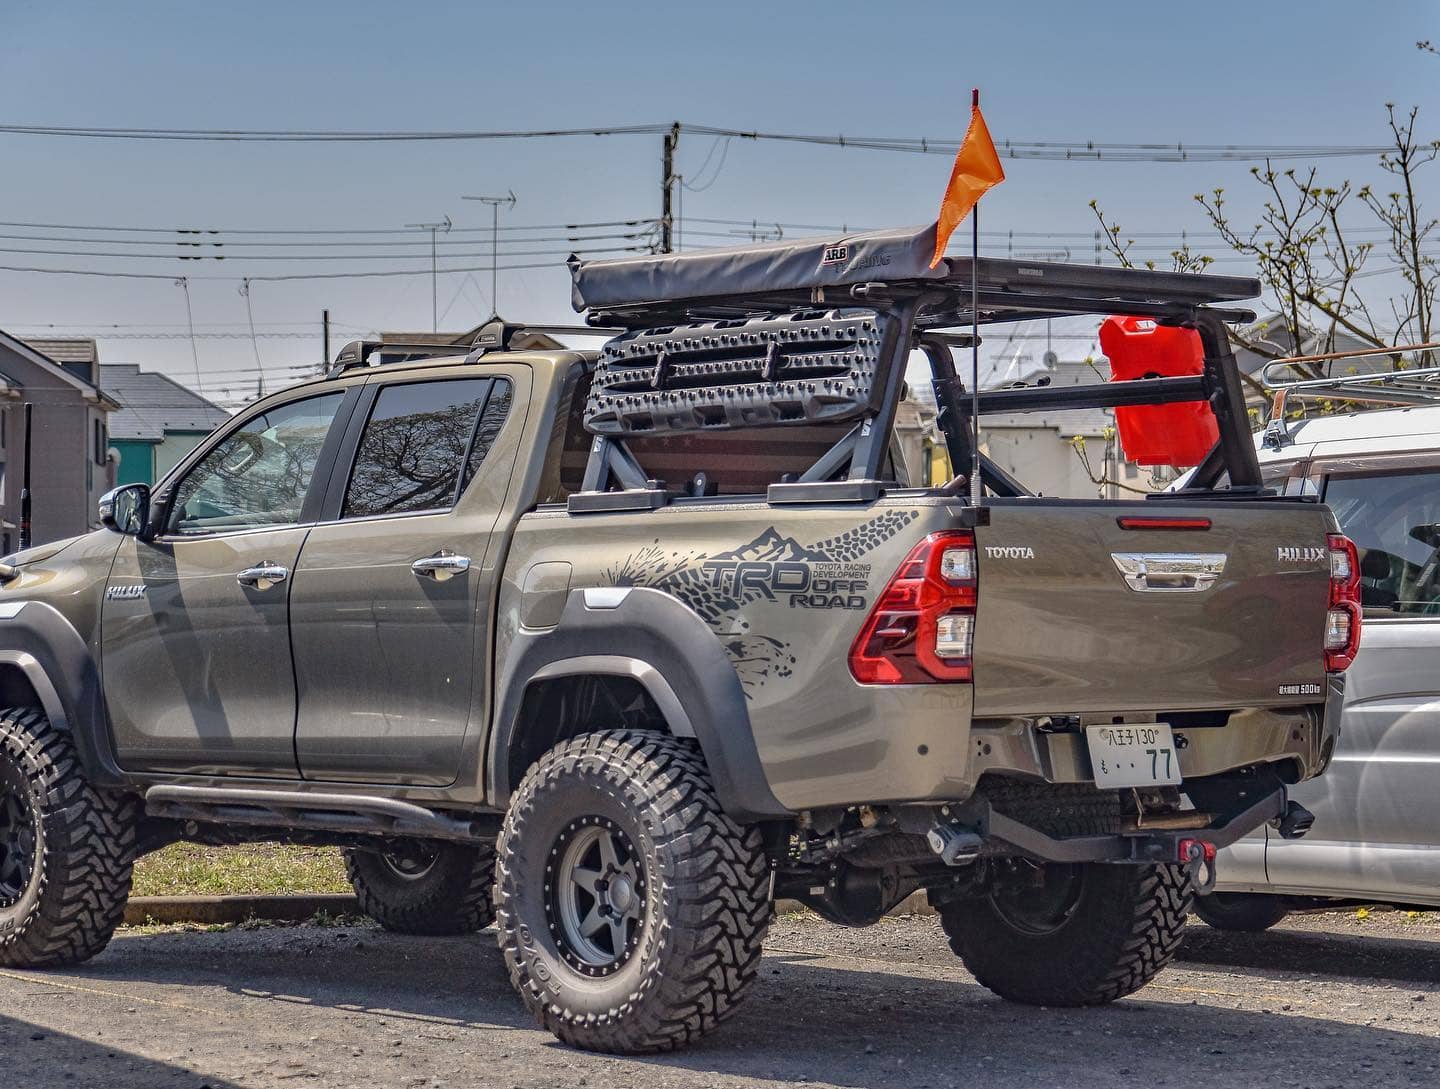 Toyota Hilux with a bed rack and Roof top tent for overlanding